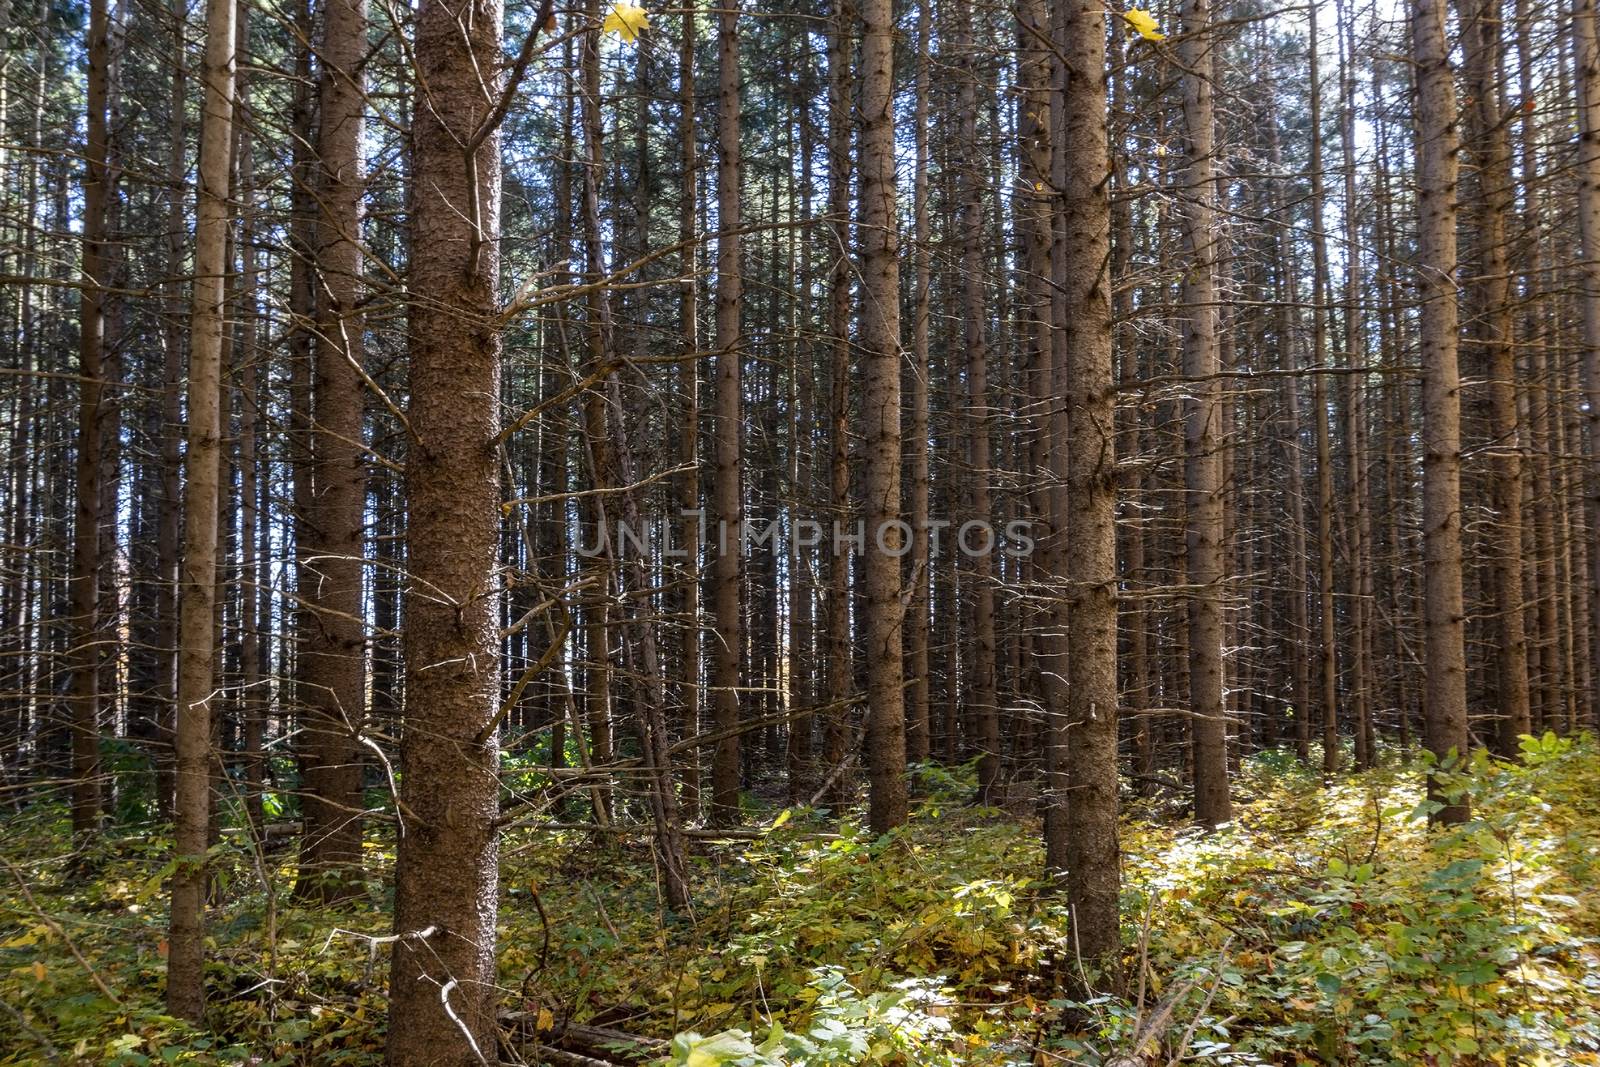 Trunks of fir trees in a coniferous forest lit by the sun against a blue sky on a warm sunny day